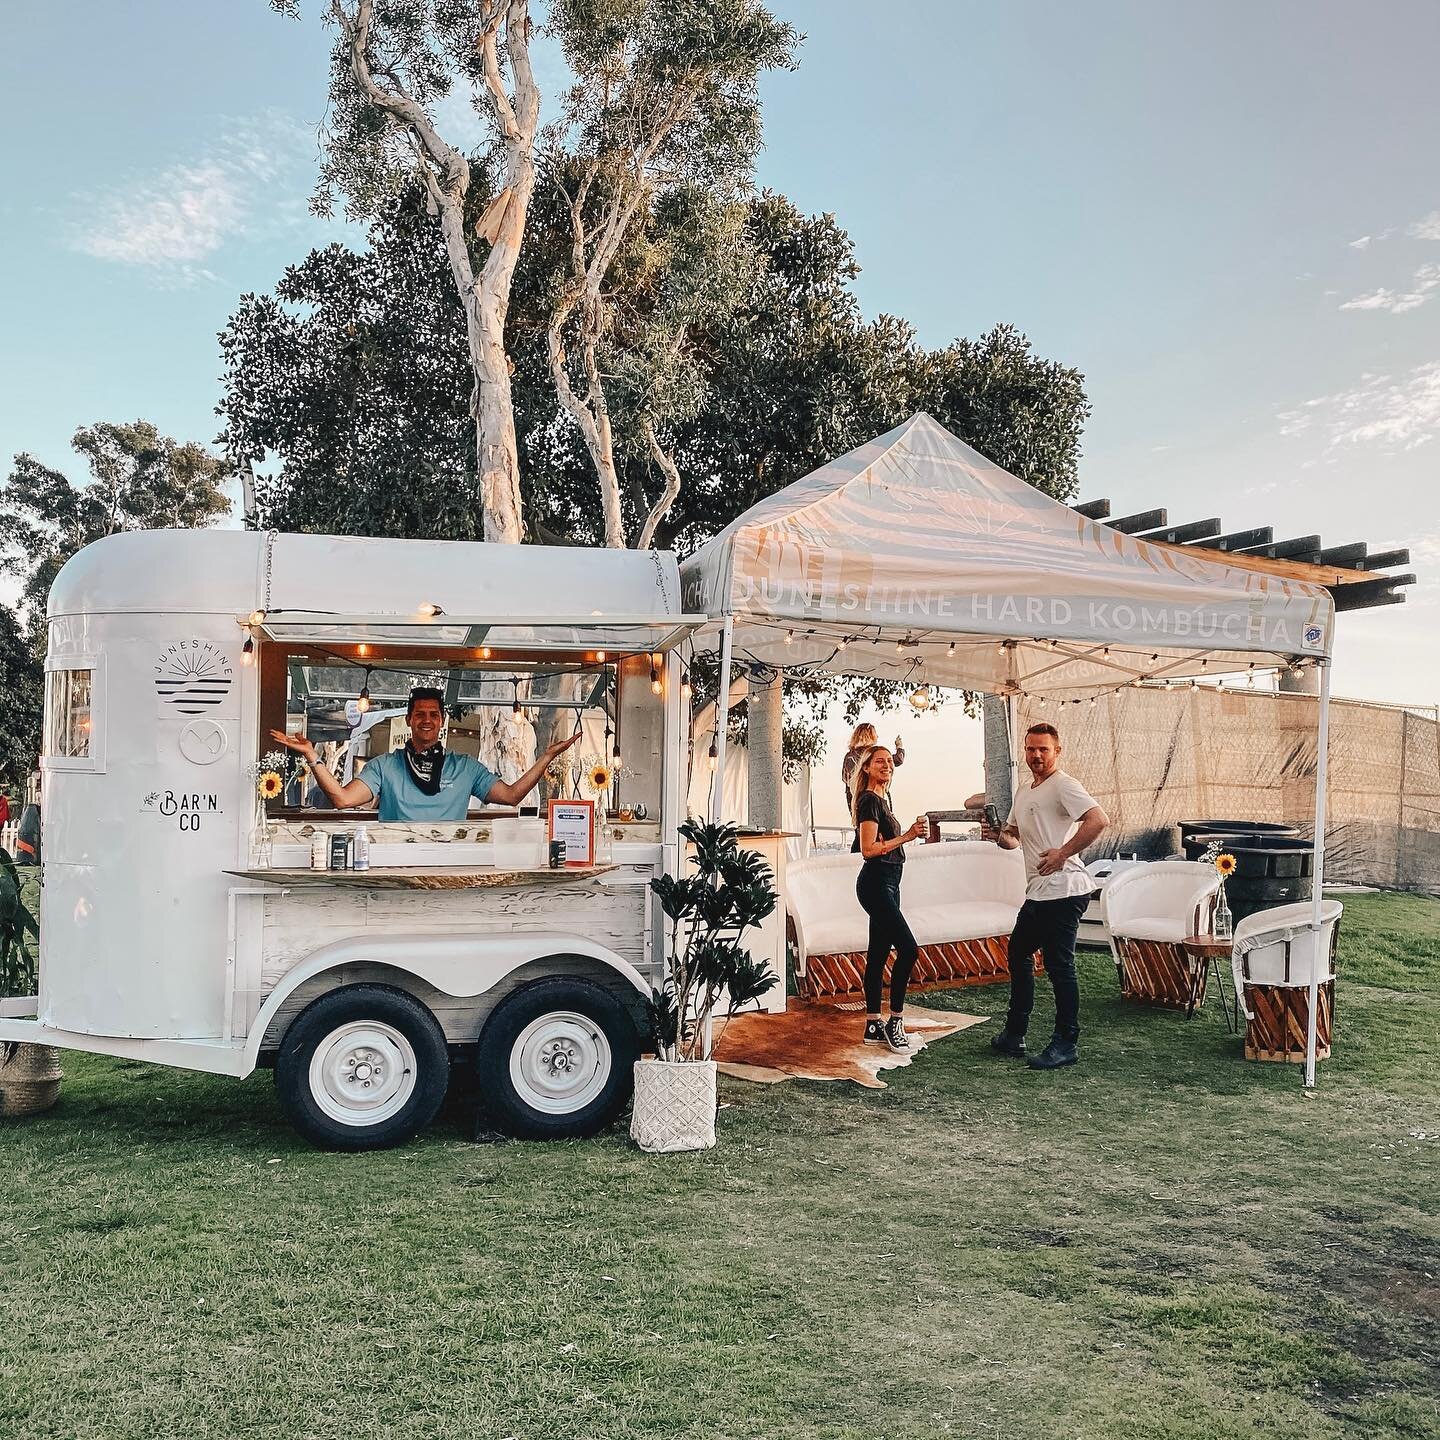 Had an amazing time partying with you all last weekend for @wonderfrontfest! 🎶 Once again, serving our favorite local kombucha brand @juneshineco💥We love partnering up and supporting local brands; get in touch!  #supportyourlocal #mobilebar #traile